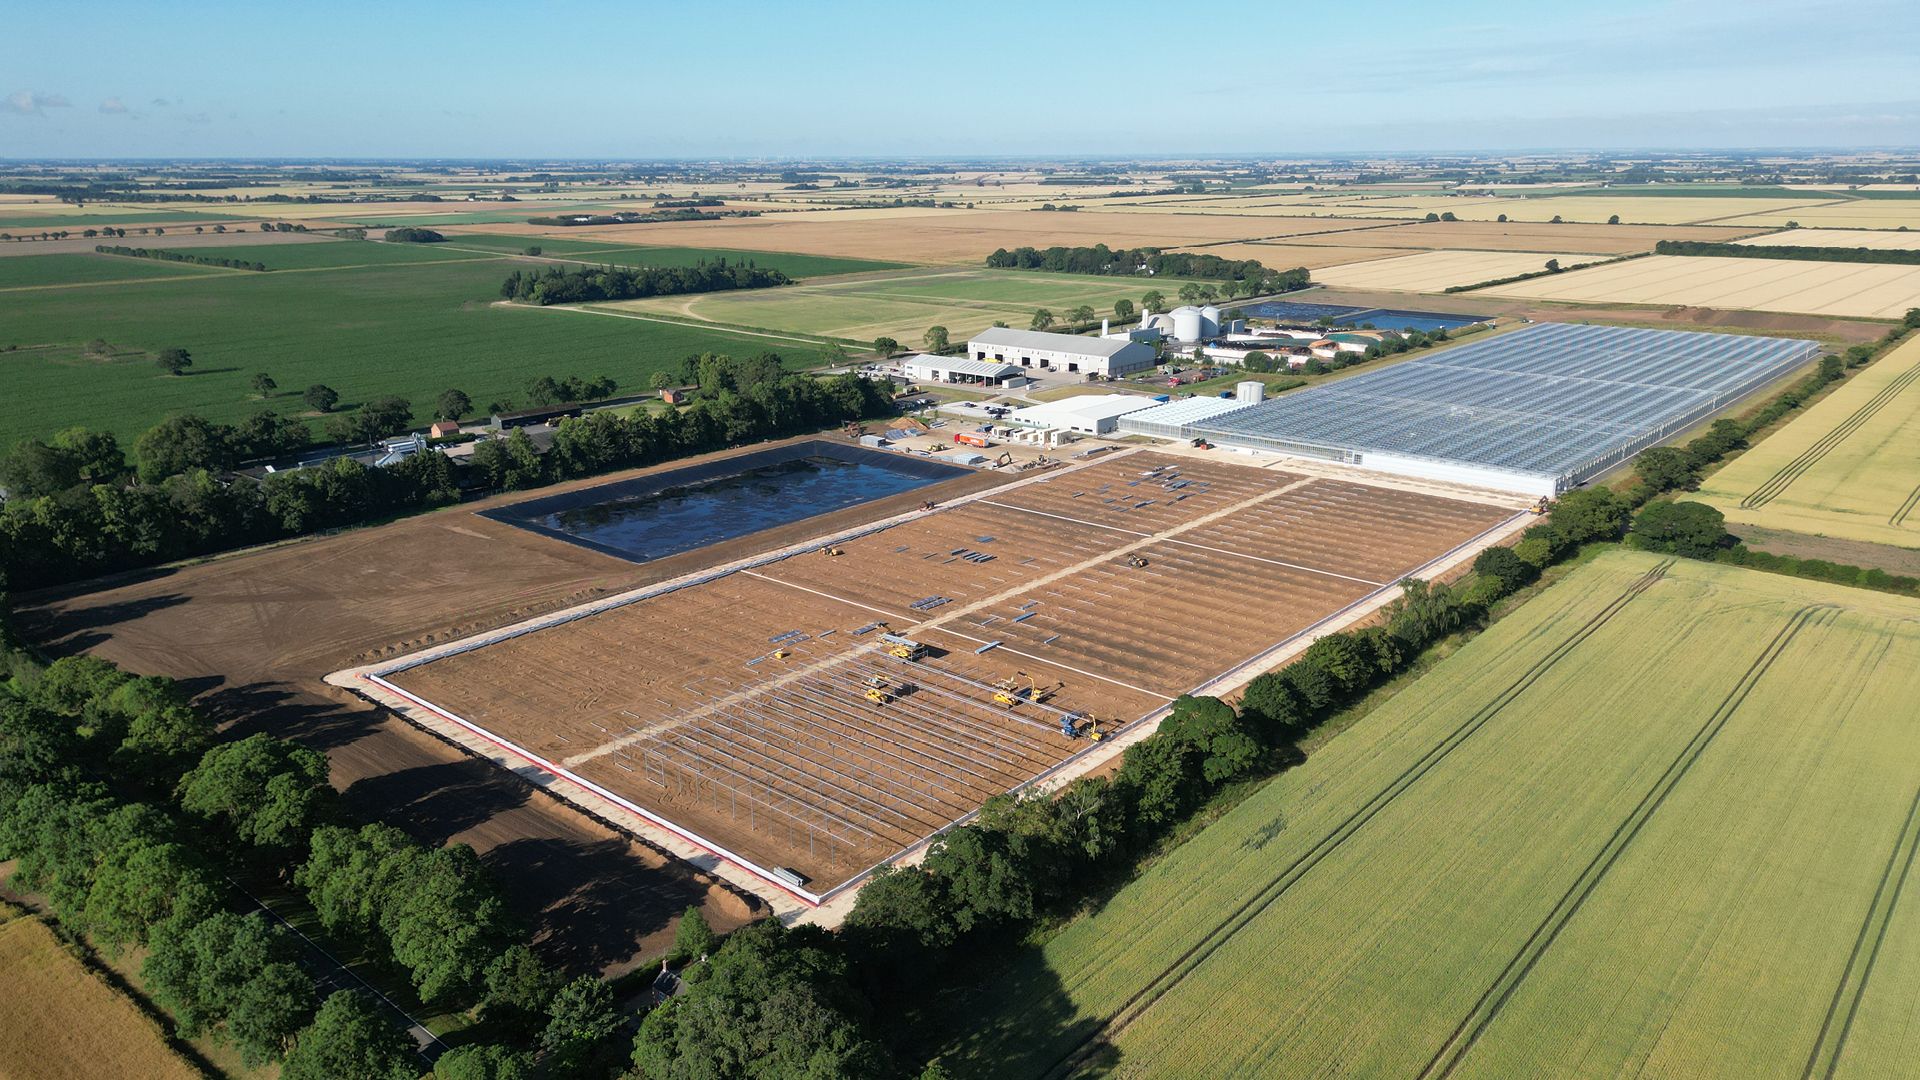 Aerial photograph of the strawberry farm glass houses. Photo credit: Dyson Farming